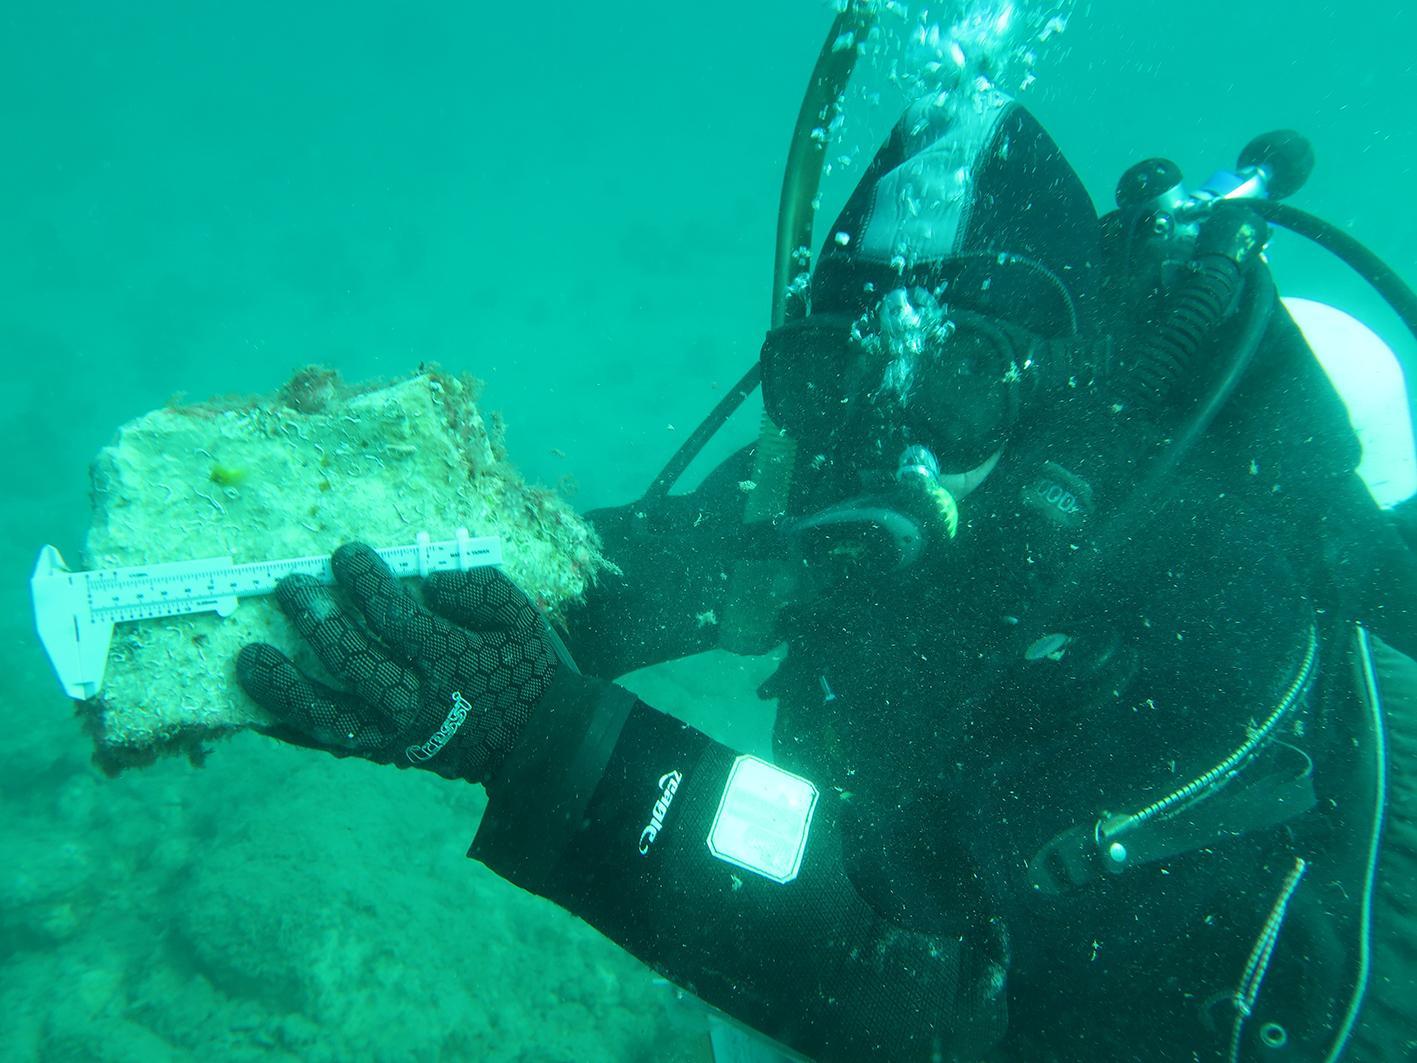 Underwater oyster research